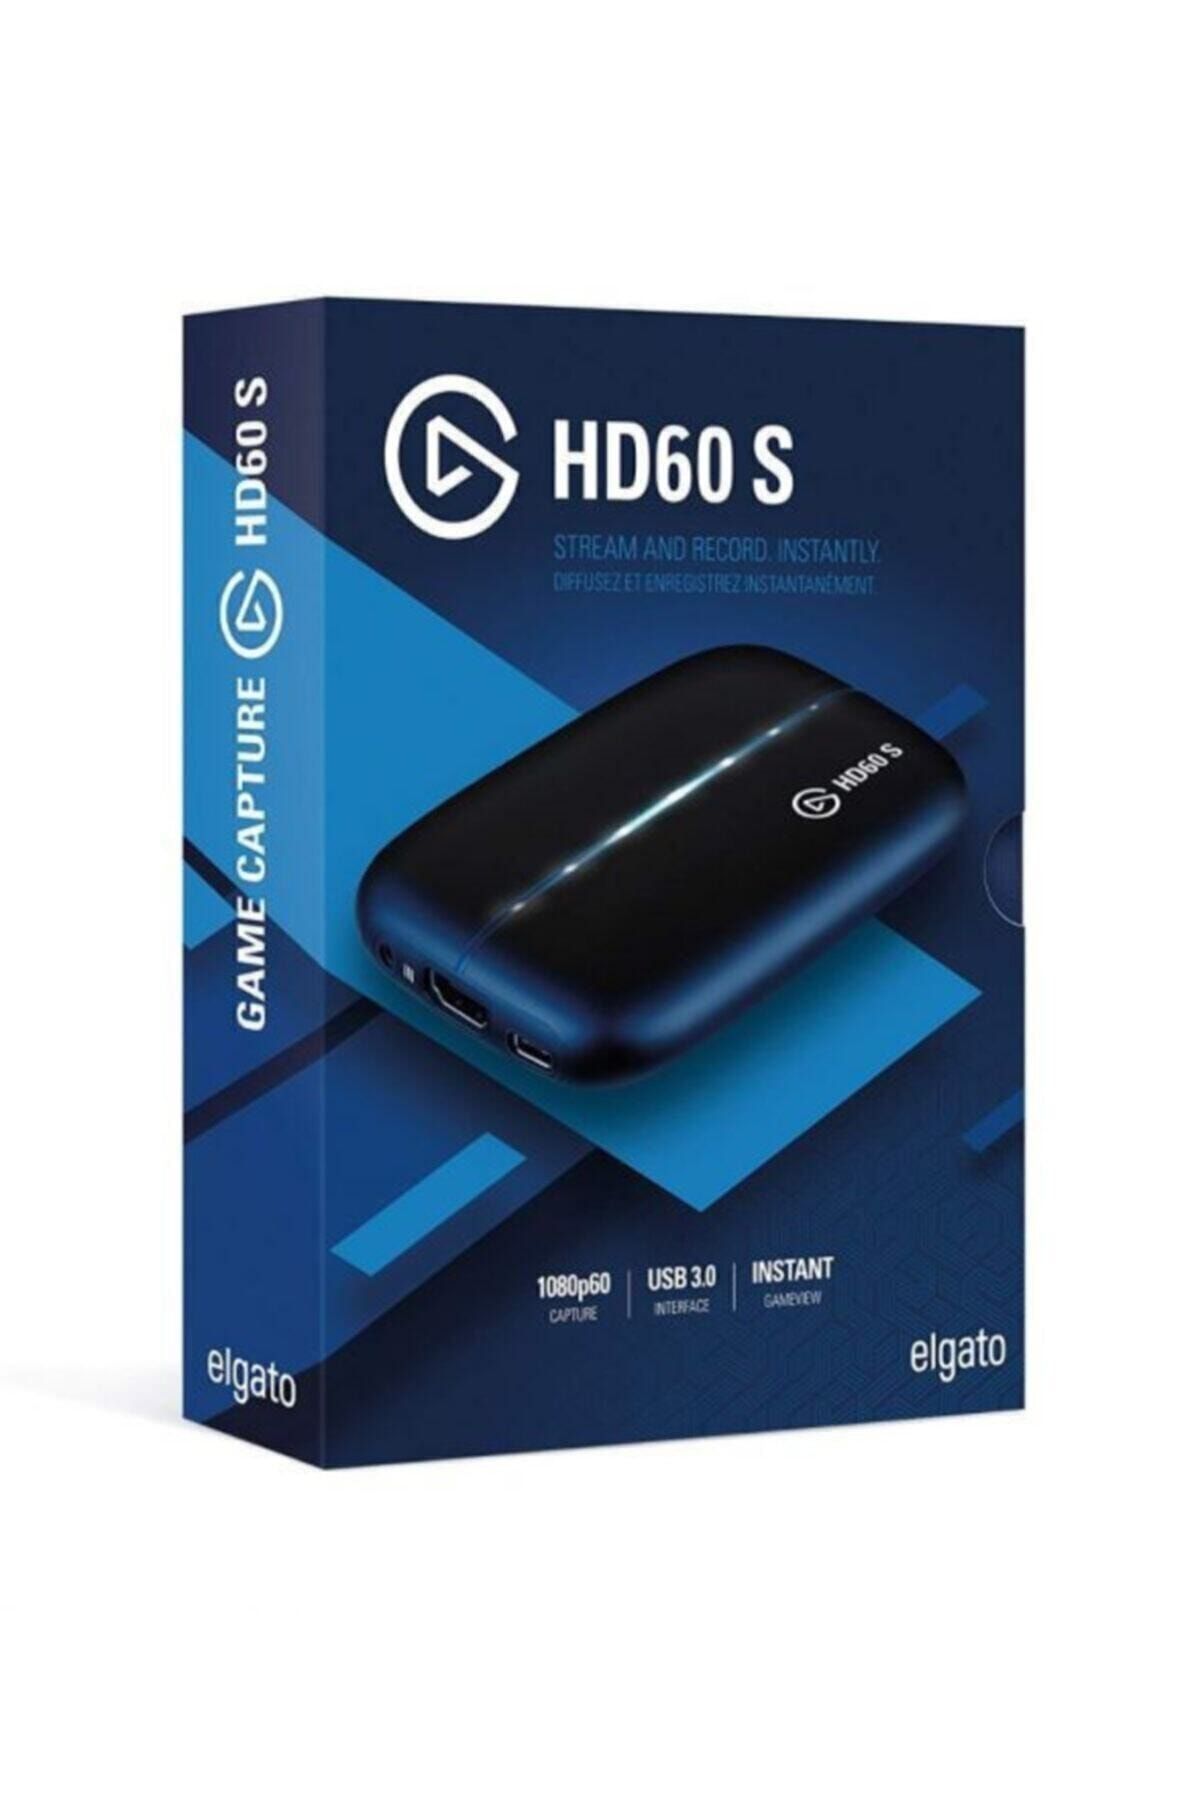 Elgato Game Capture Card Hd60 S 1080p For Playstation,x Box